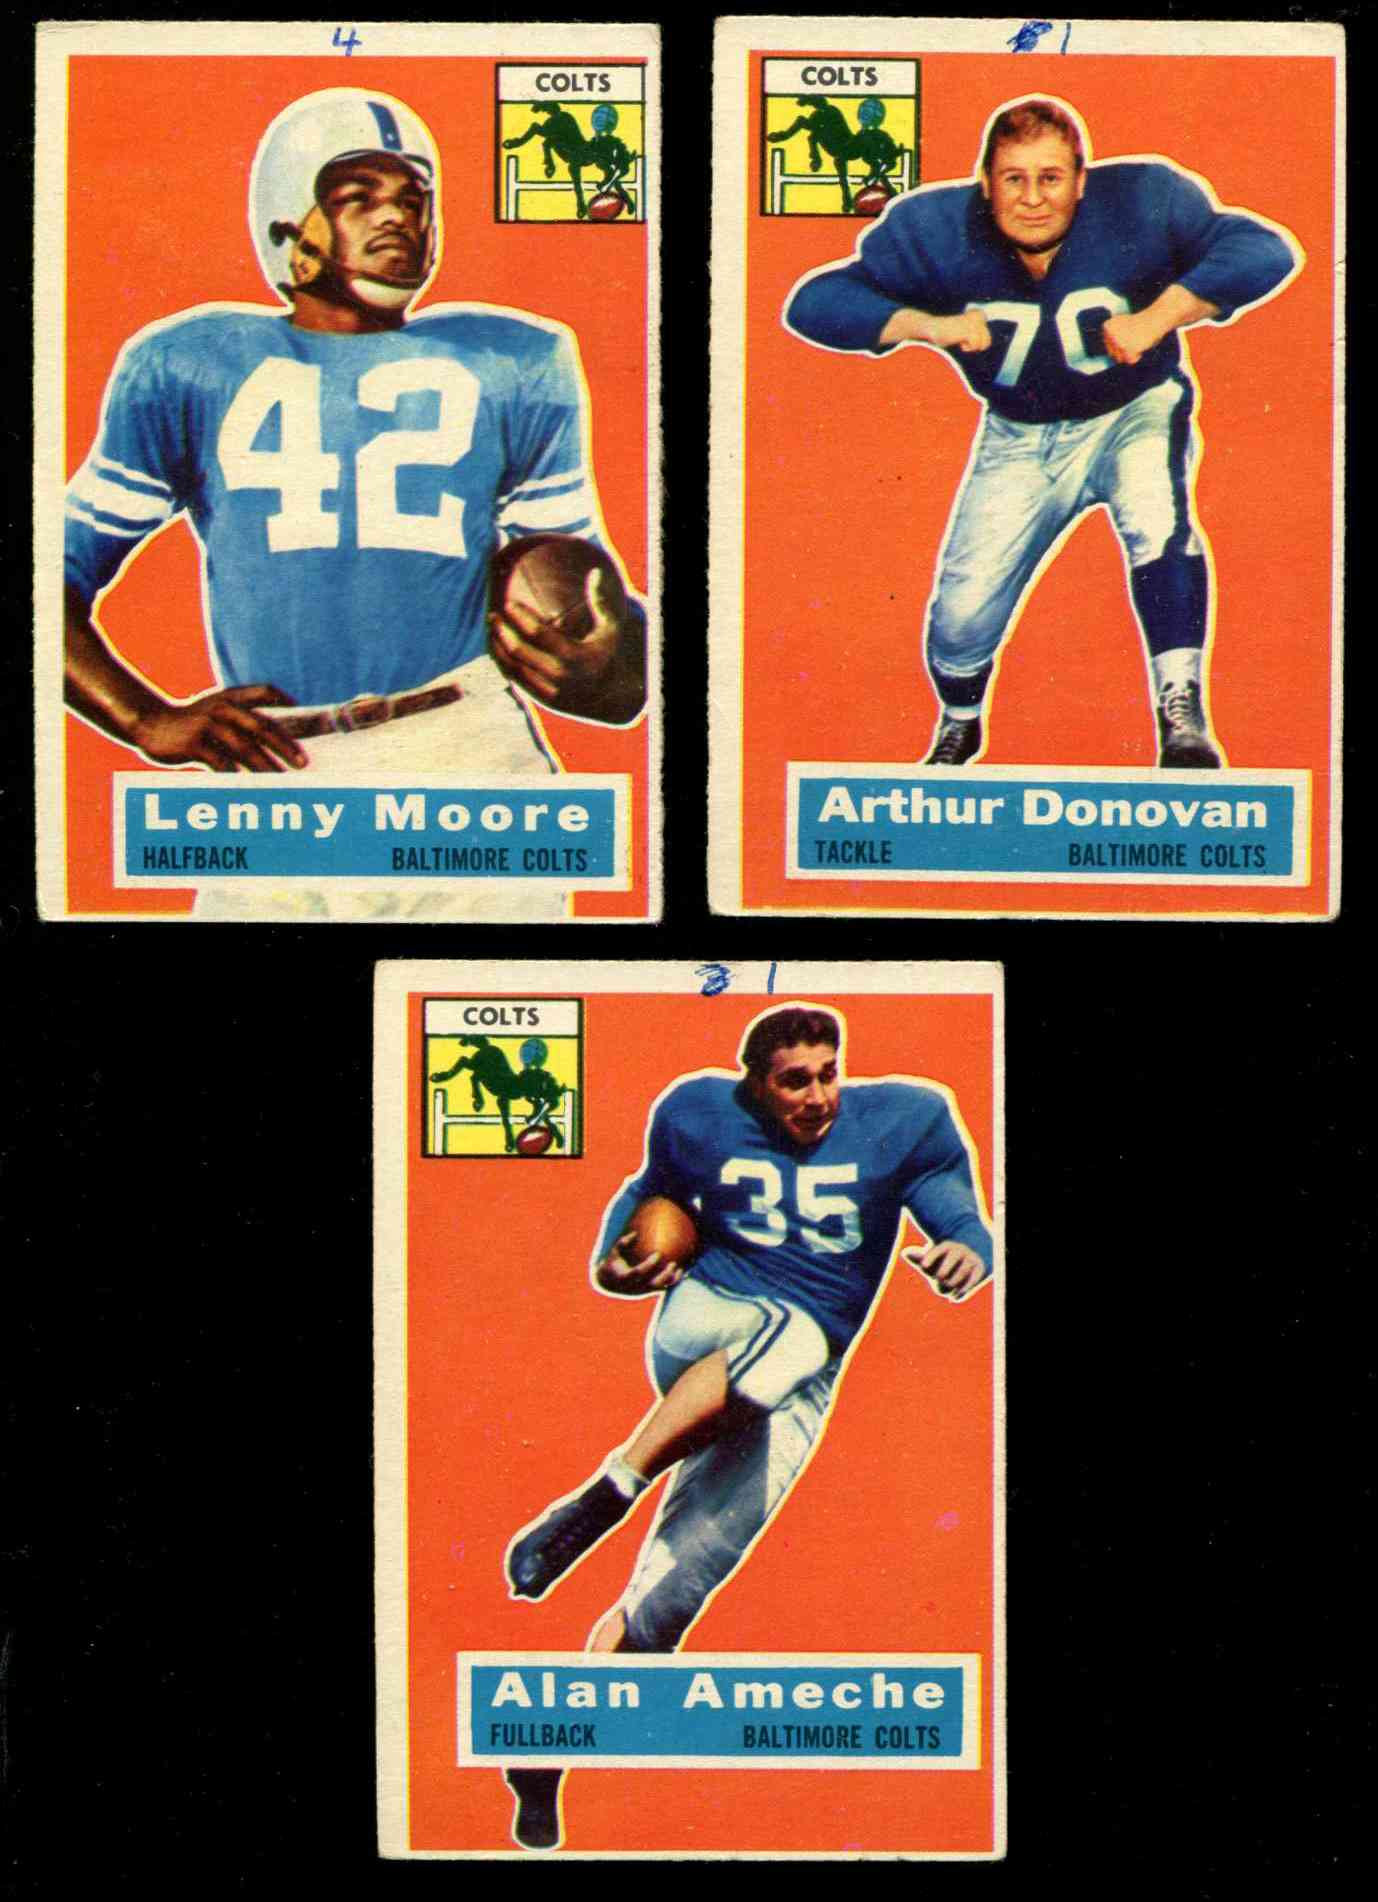  Baltimore COLTS - 1956 Topps Football Team Lot w/Lenny Moore ROOKIE(bk=$90 Football cards value